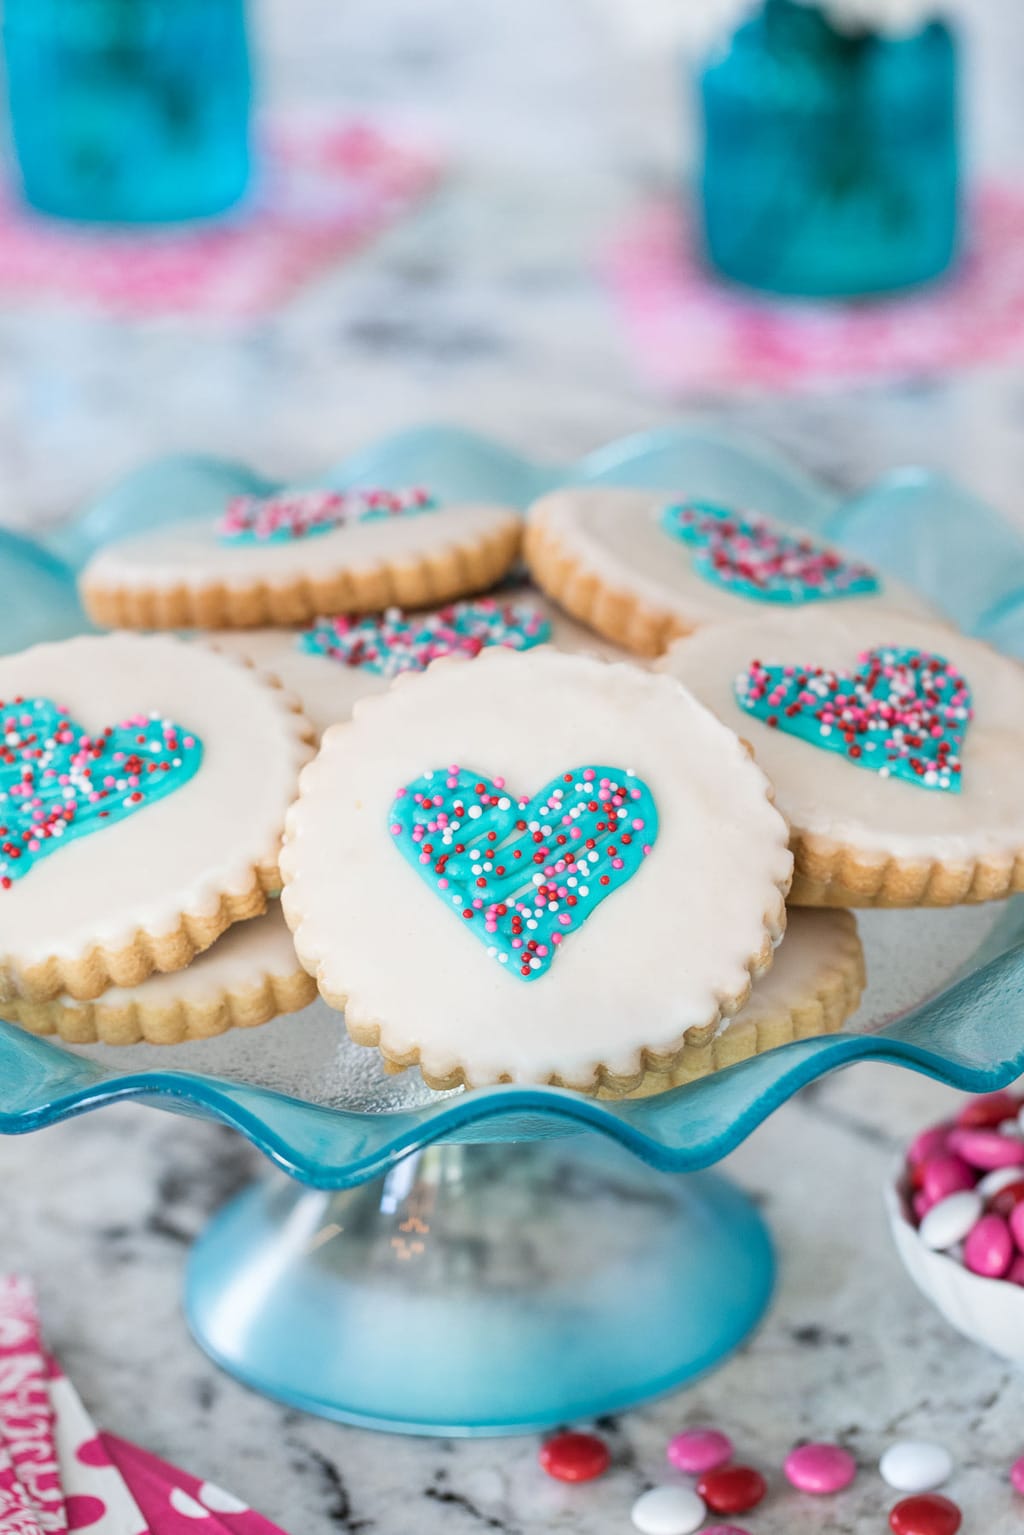 Photo of Easy Decorated Valentine Cookies on a turquoise glass cake stand.